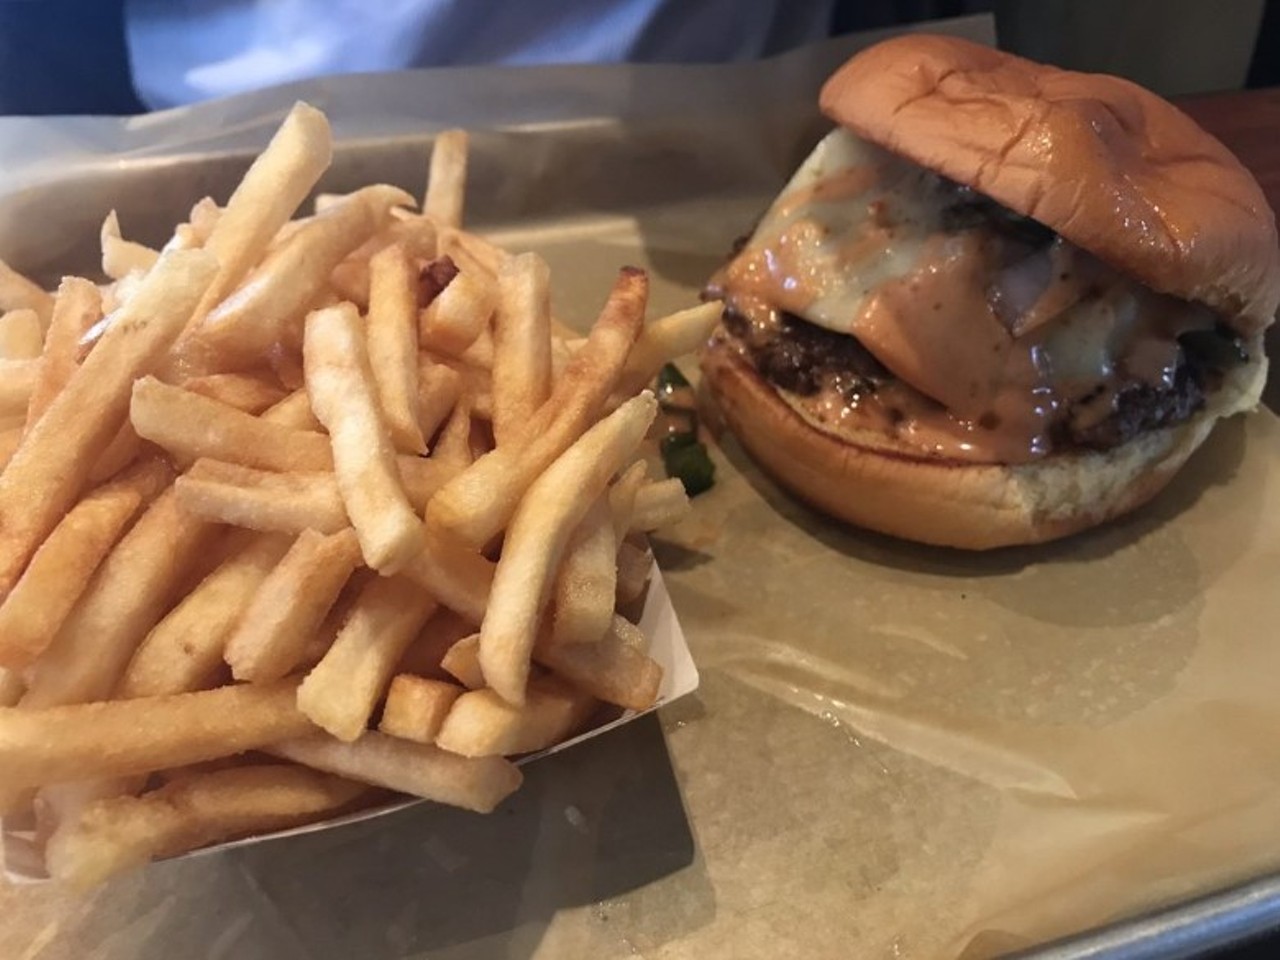 #1: Jack Nolen&#146;s
(2501 S 9th Street; jacknolens.com. 
Jack Nolen&#146;s achieved a perfect five stars with 97 reviews. The Yelp reviews for the best burger here.
Read Cheryl Baehr&#146;s review here.
Photo credit: Jason P. via Yelp